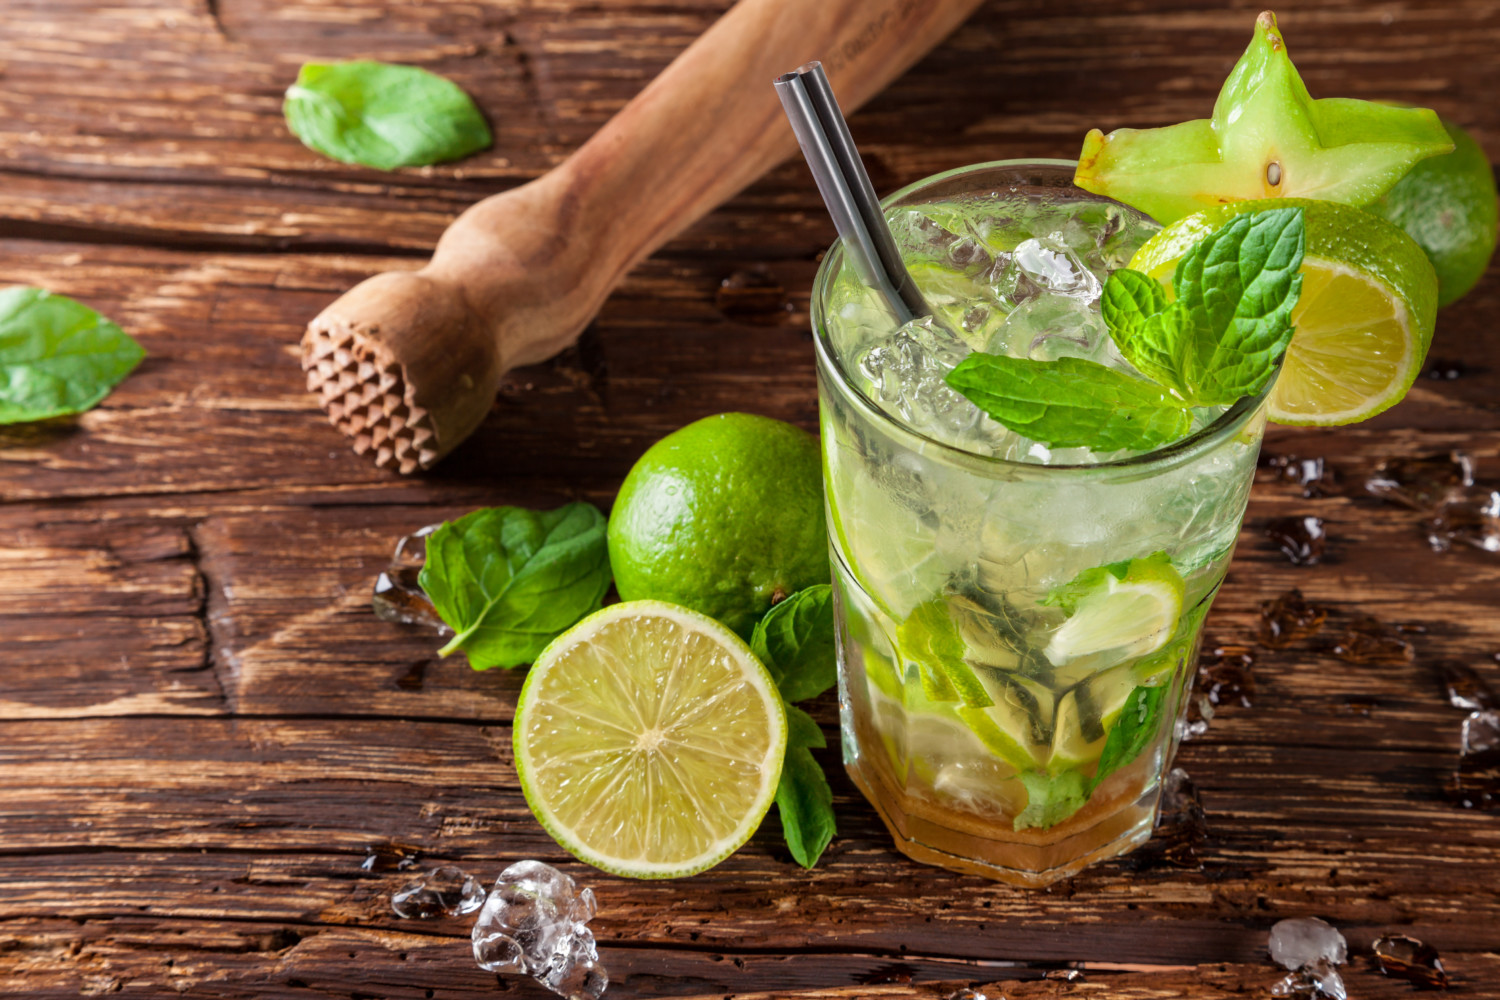 Mojito - one of the most popular cocktails in the world